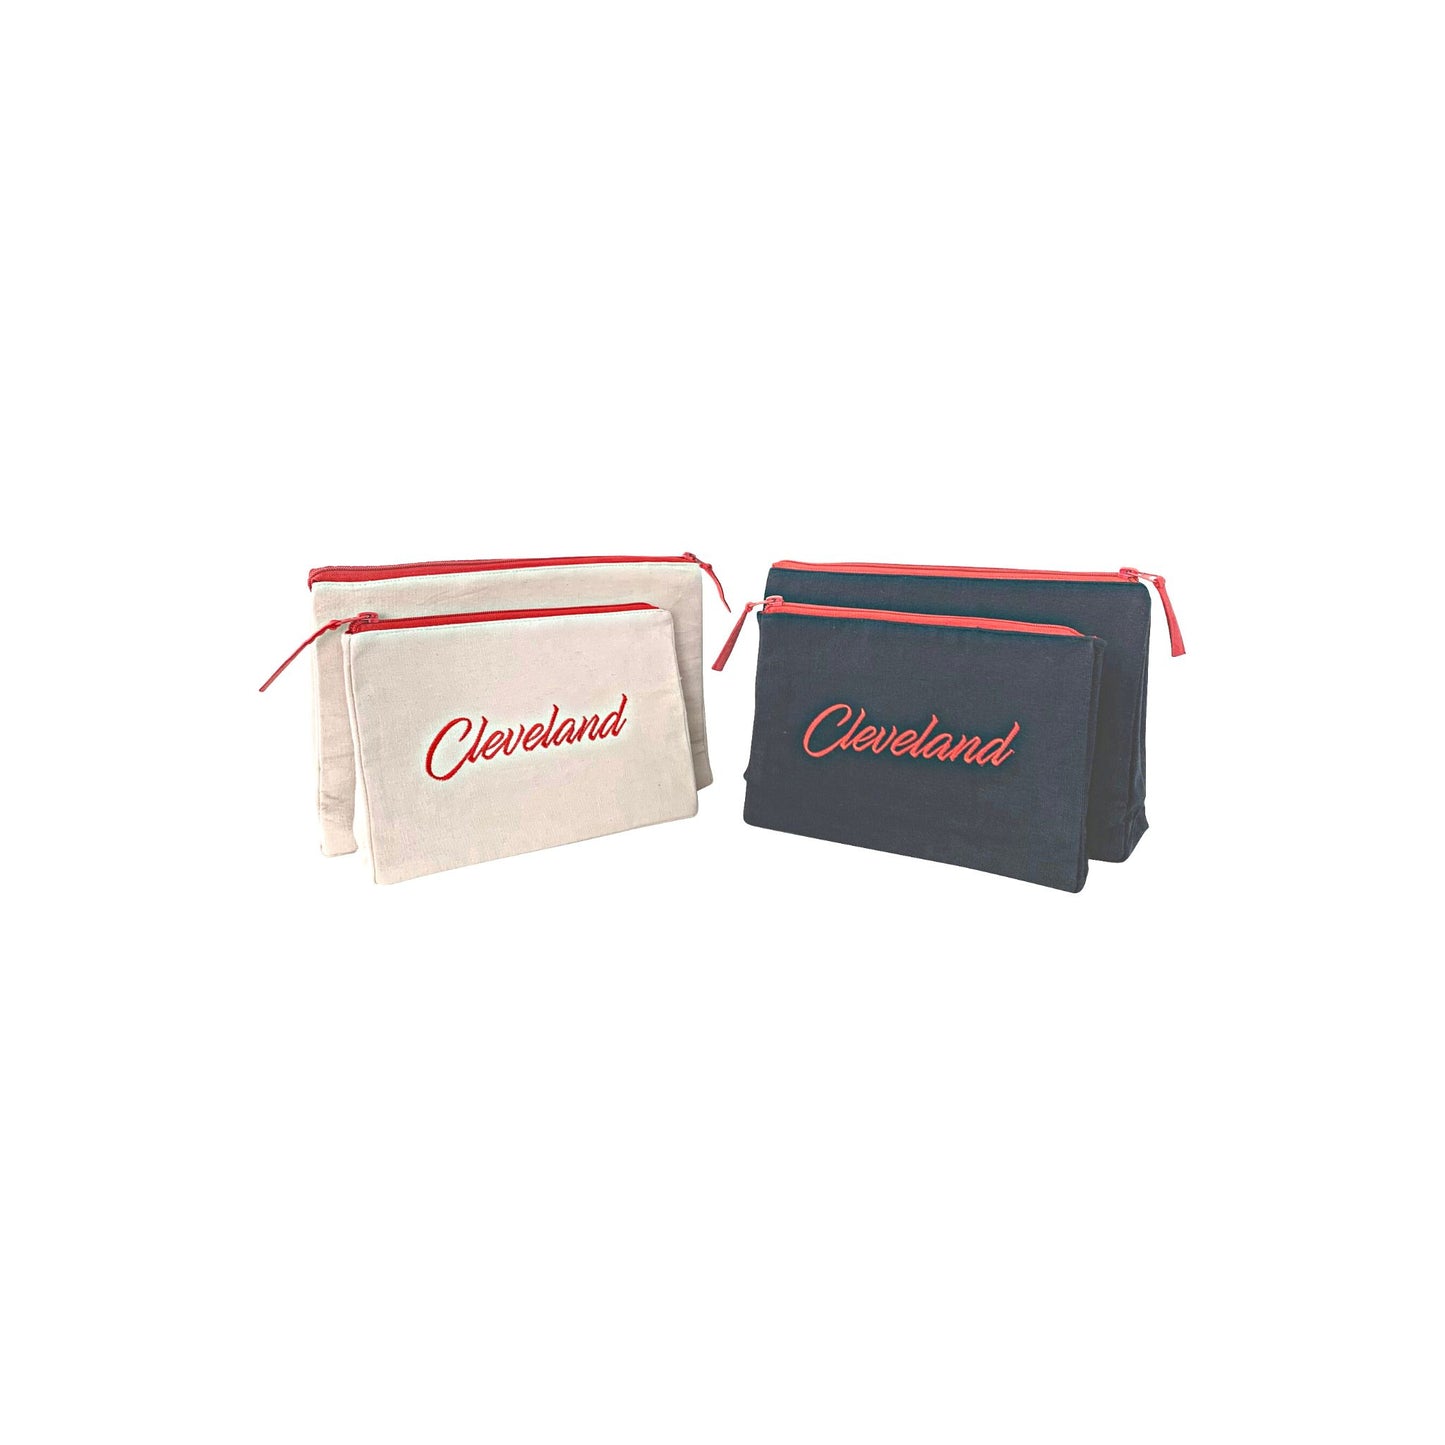 Cleveland Makeup Bag Sets in Day and Night